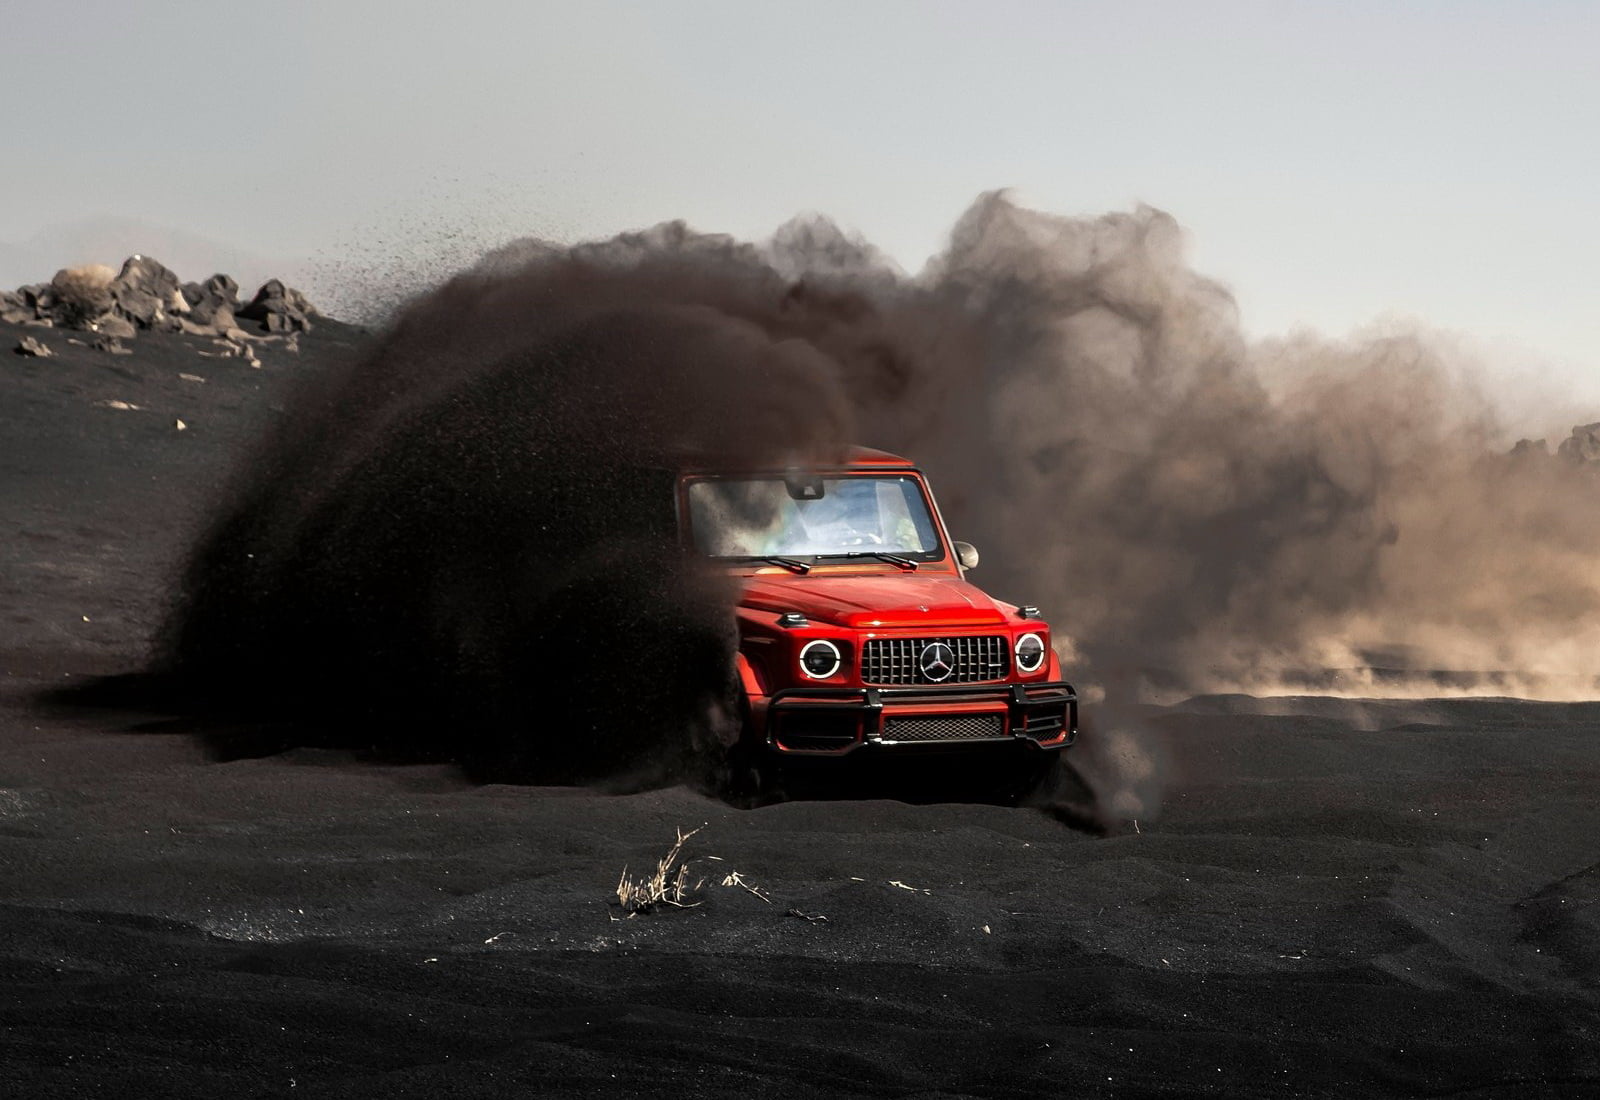 amg, g63, mercedes-benz, mode of transportation, smoke - physical structure